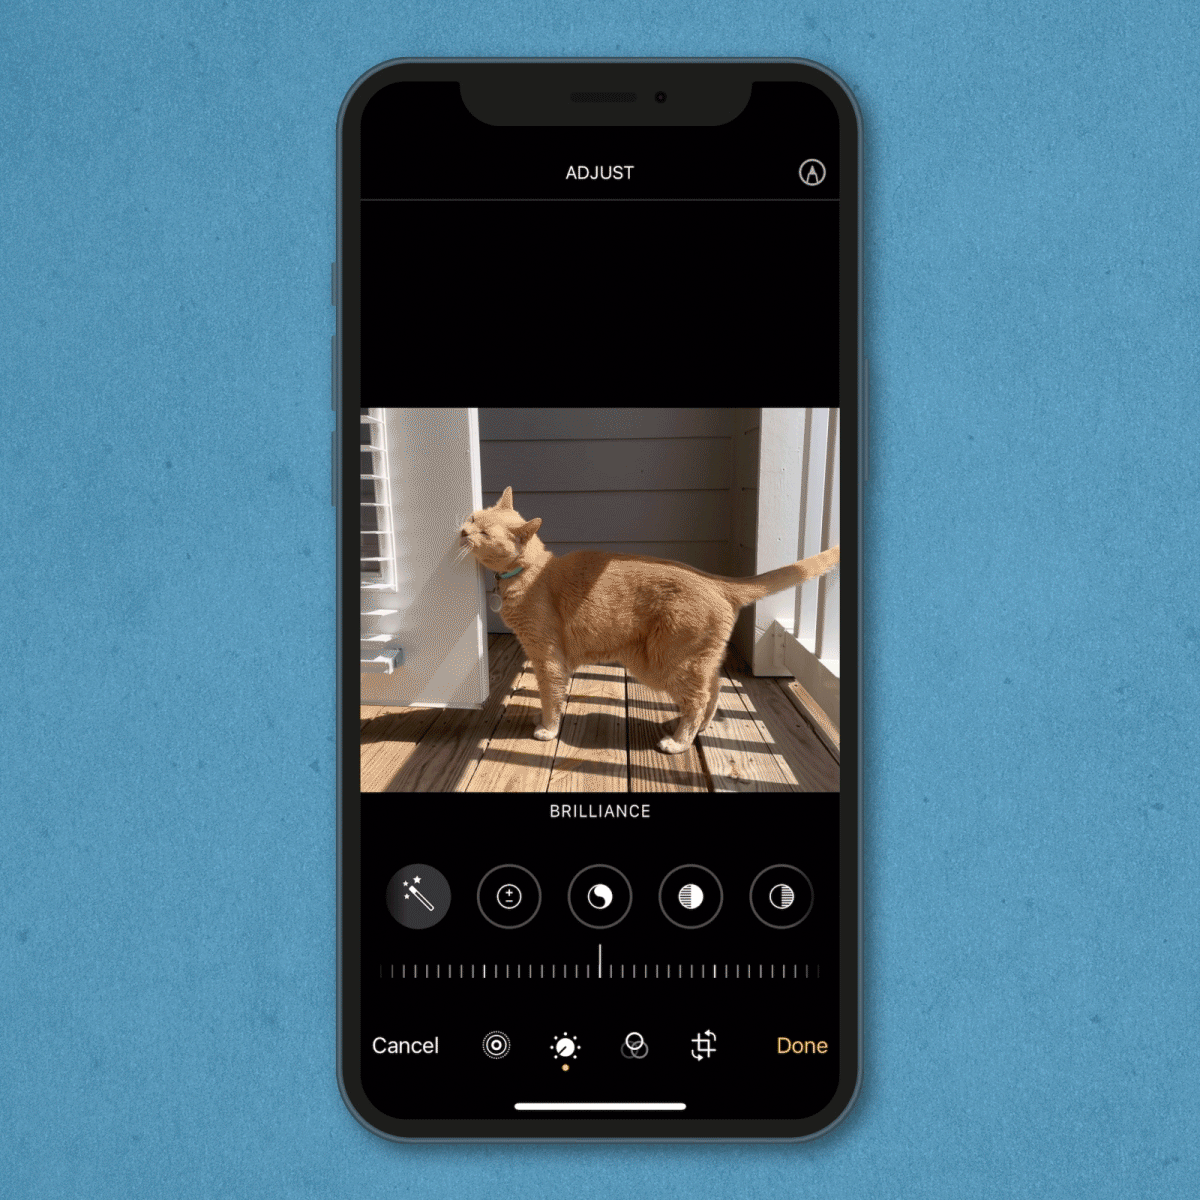 gif showing how to edit a photo's brilliance on an iPhone